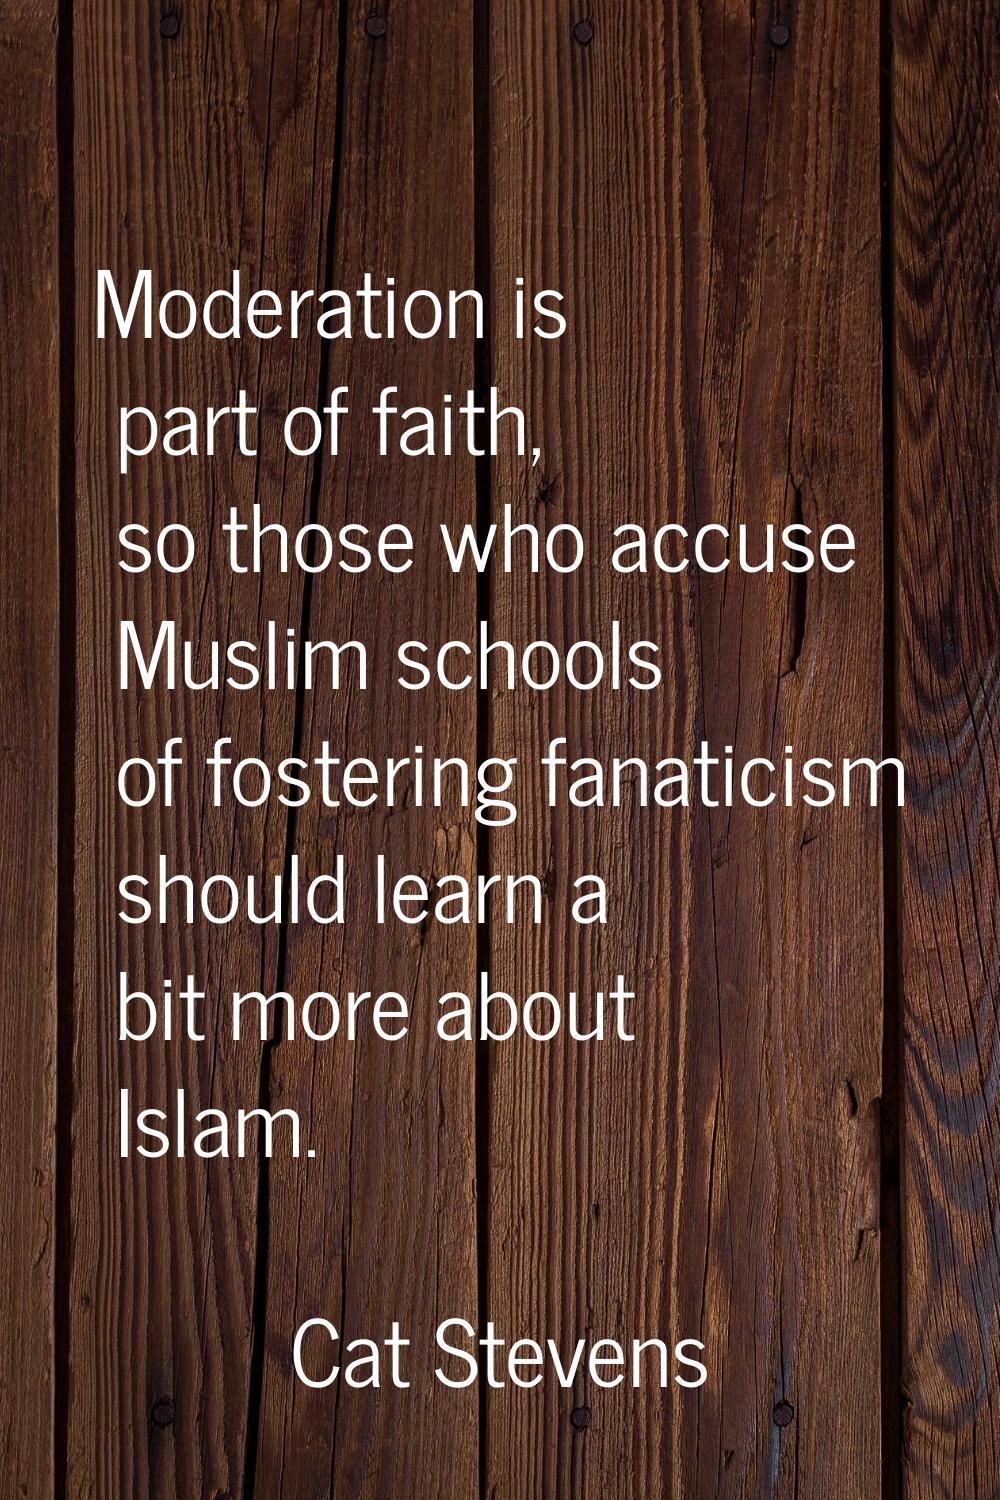 Moderation is part of faith, so those who accuse Muslim schools of fostering fanaticism should lear